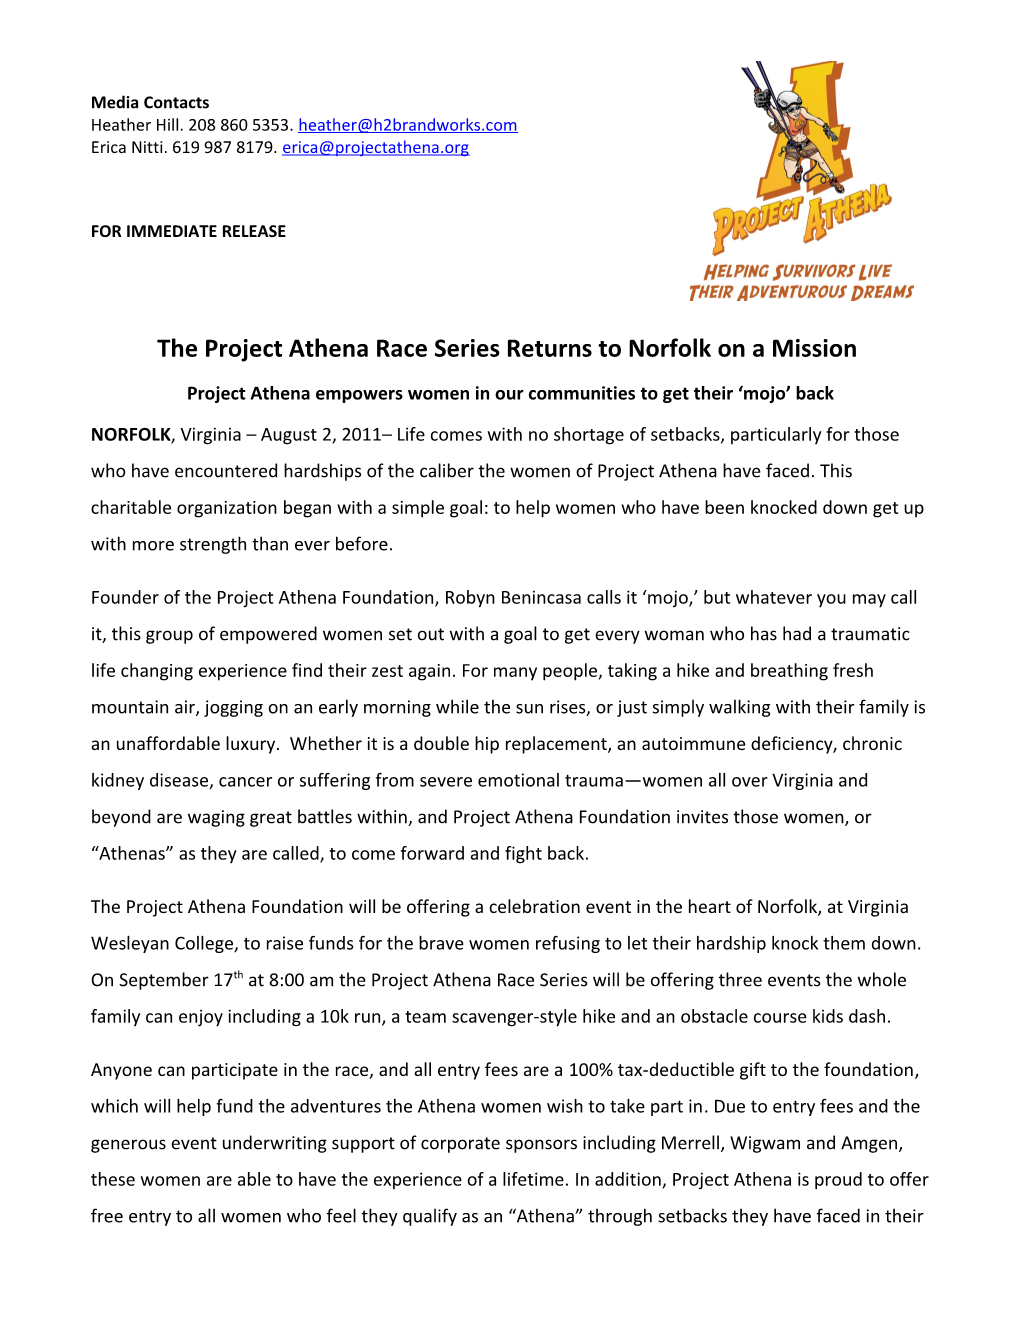 The Project Athena Race Series Returns to Norfolk on a Mission